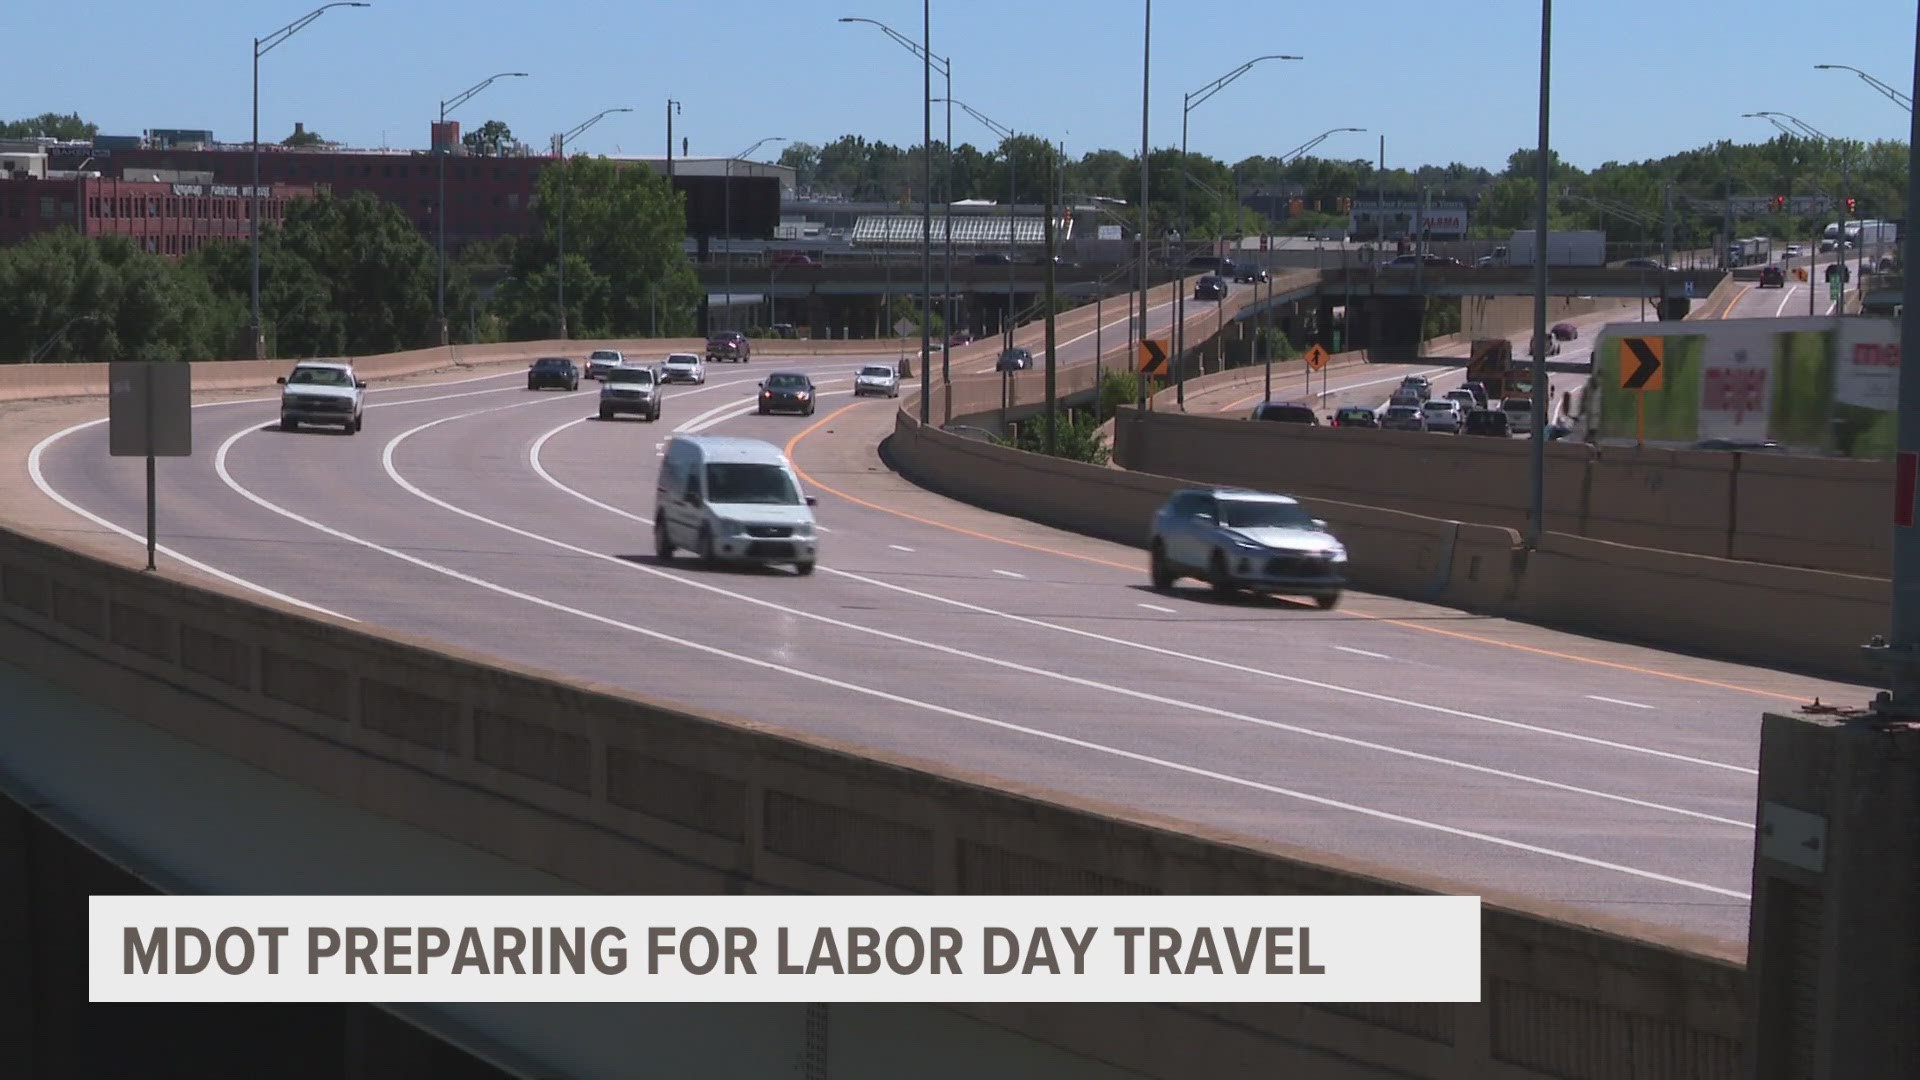 With Labor Day Weekend approaching travel and travel headaches are back on people's minds.